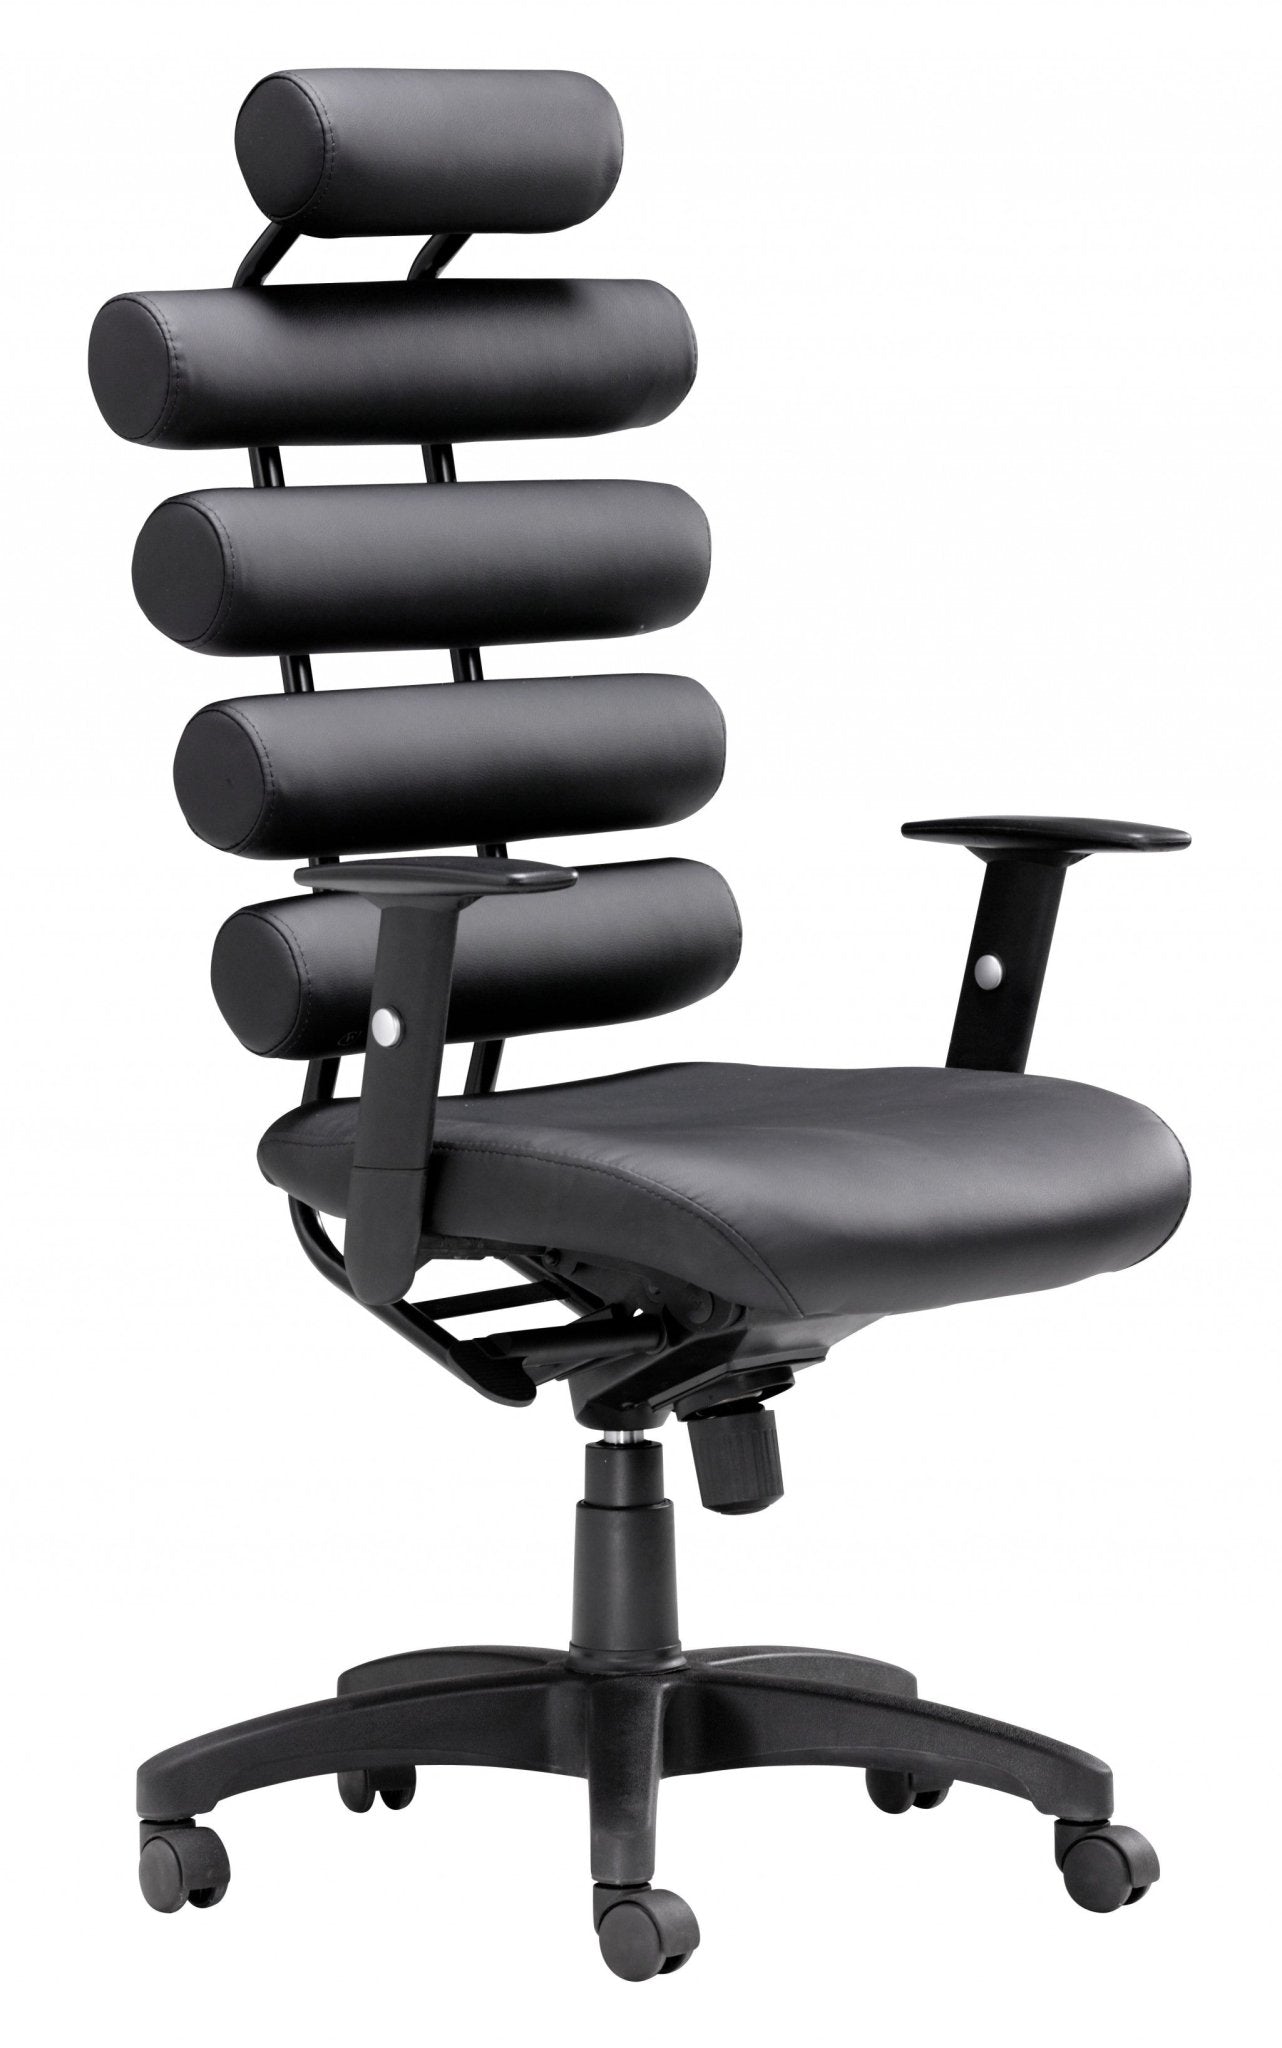 Black-Adjustable-Swivel-Metal-Rolling-Office-Chair-Office-Chairs